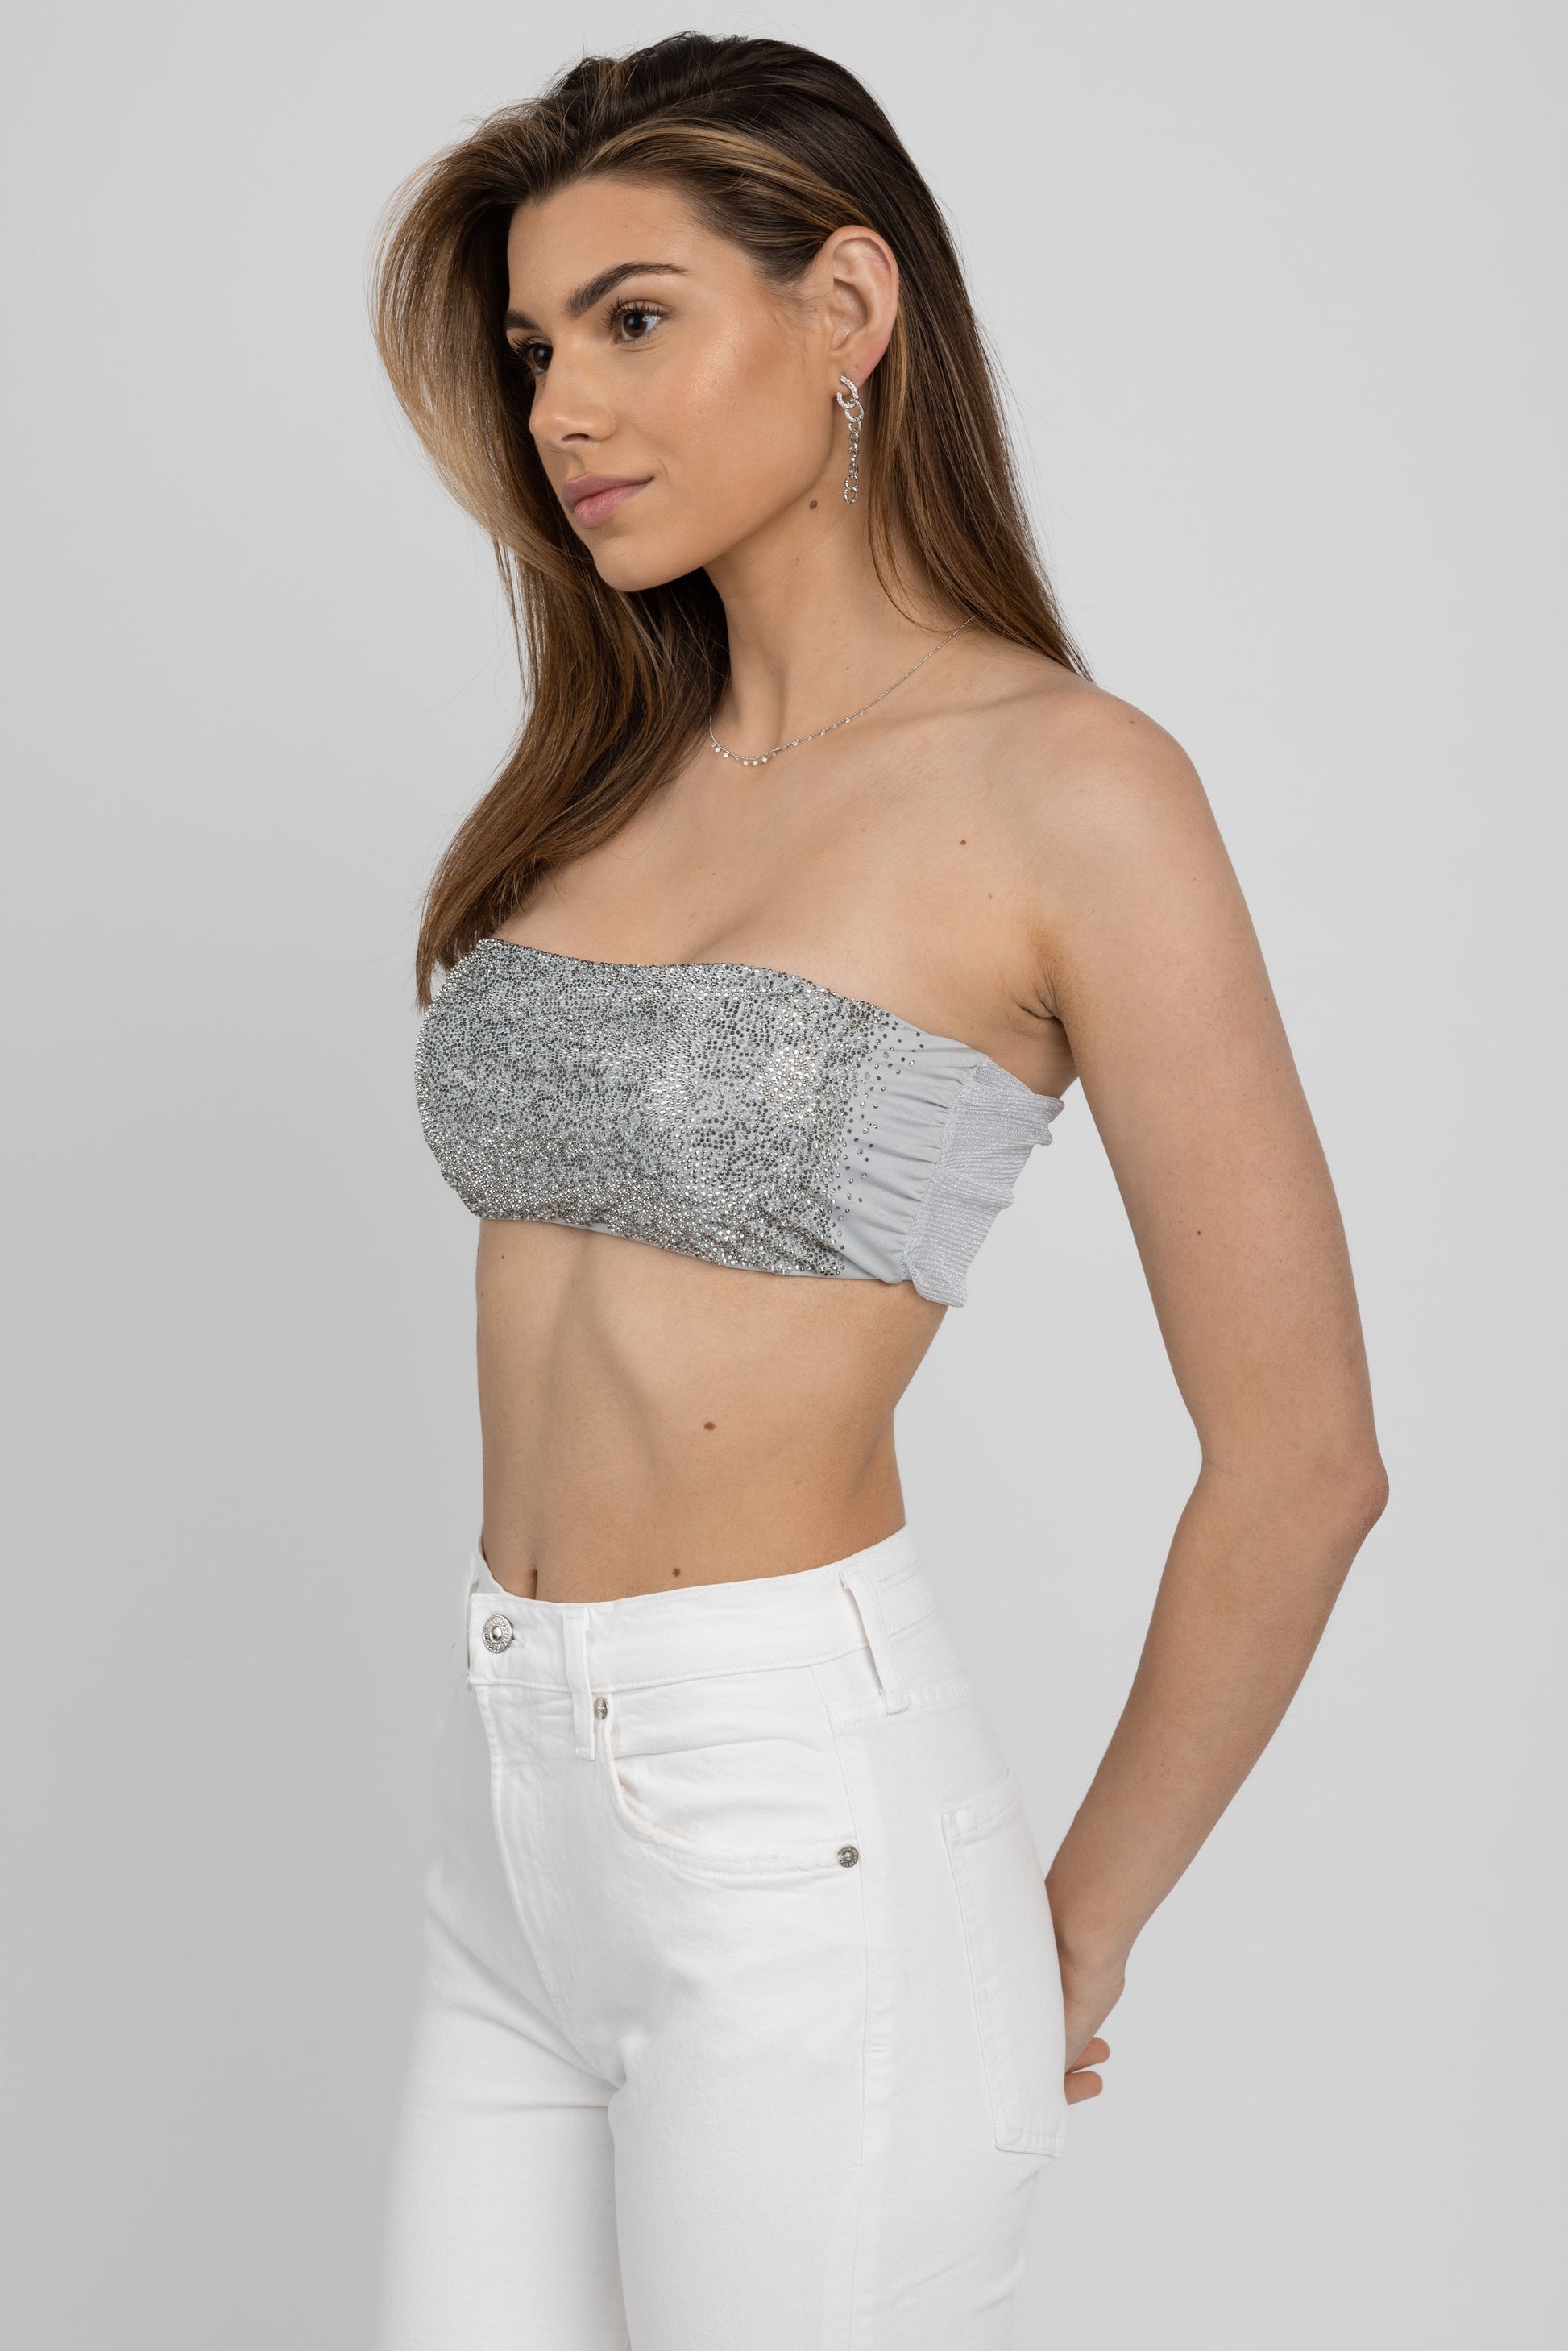 FORTE FORTE 'The Magic Chest' Crystal Strass Bandeau in Silver